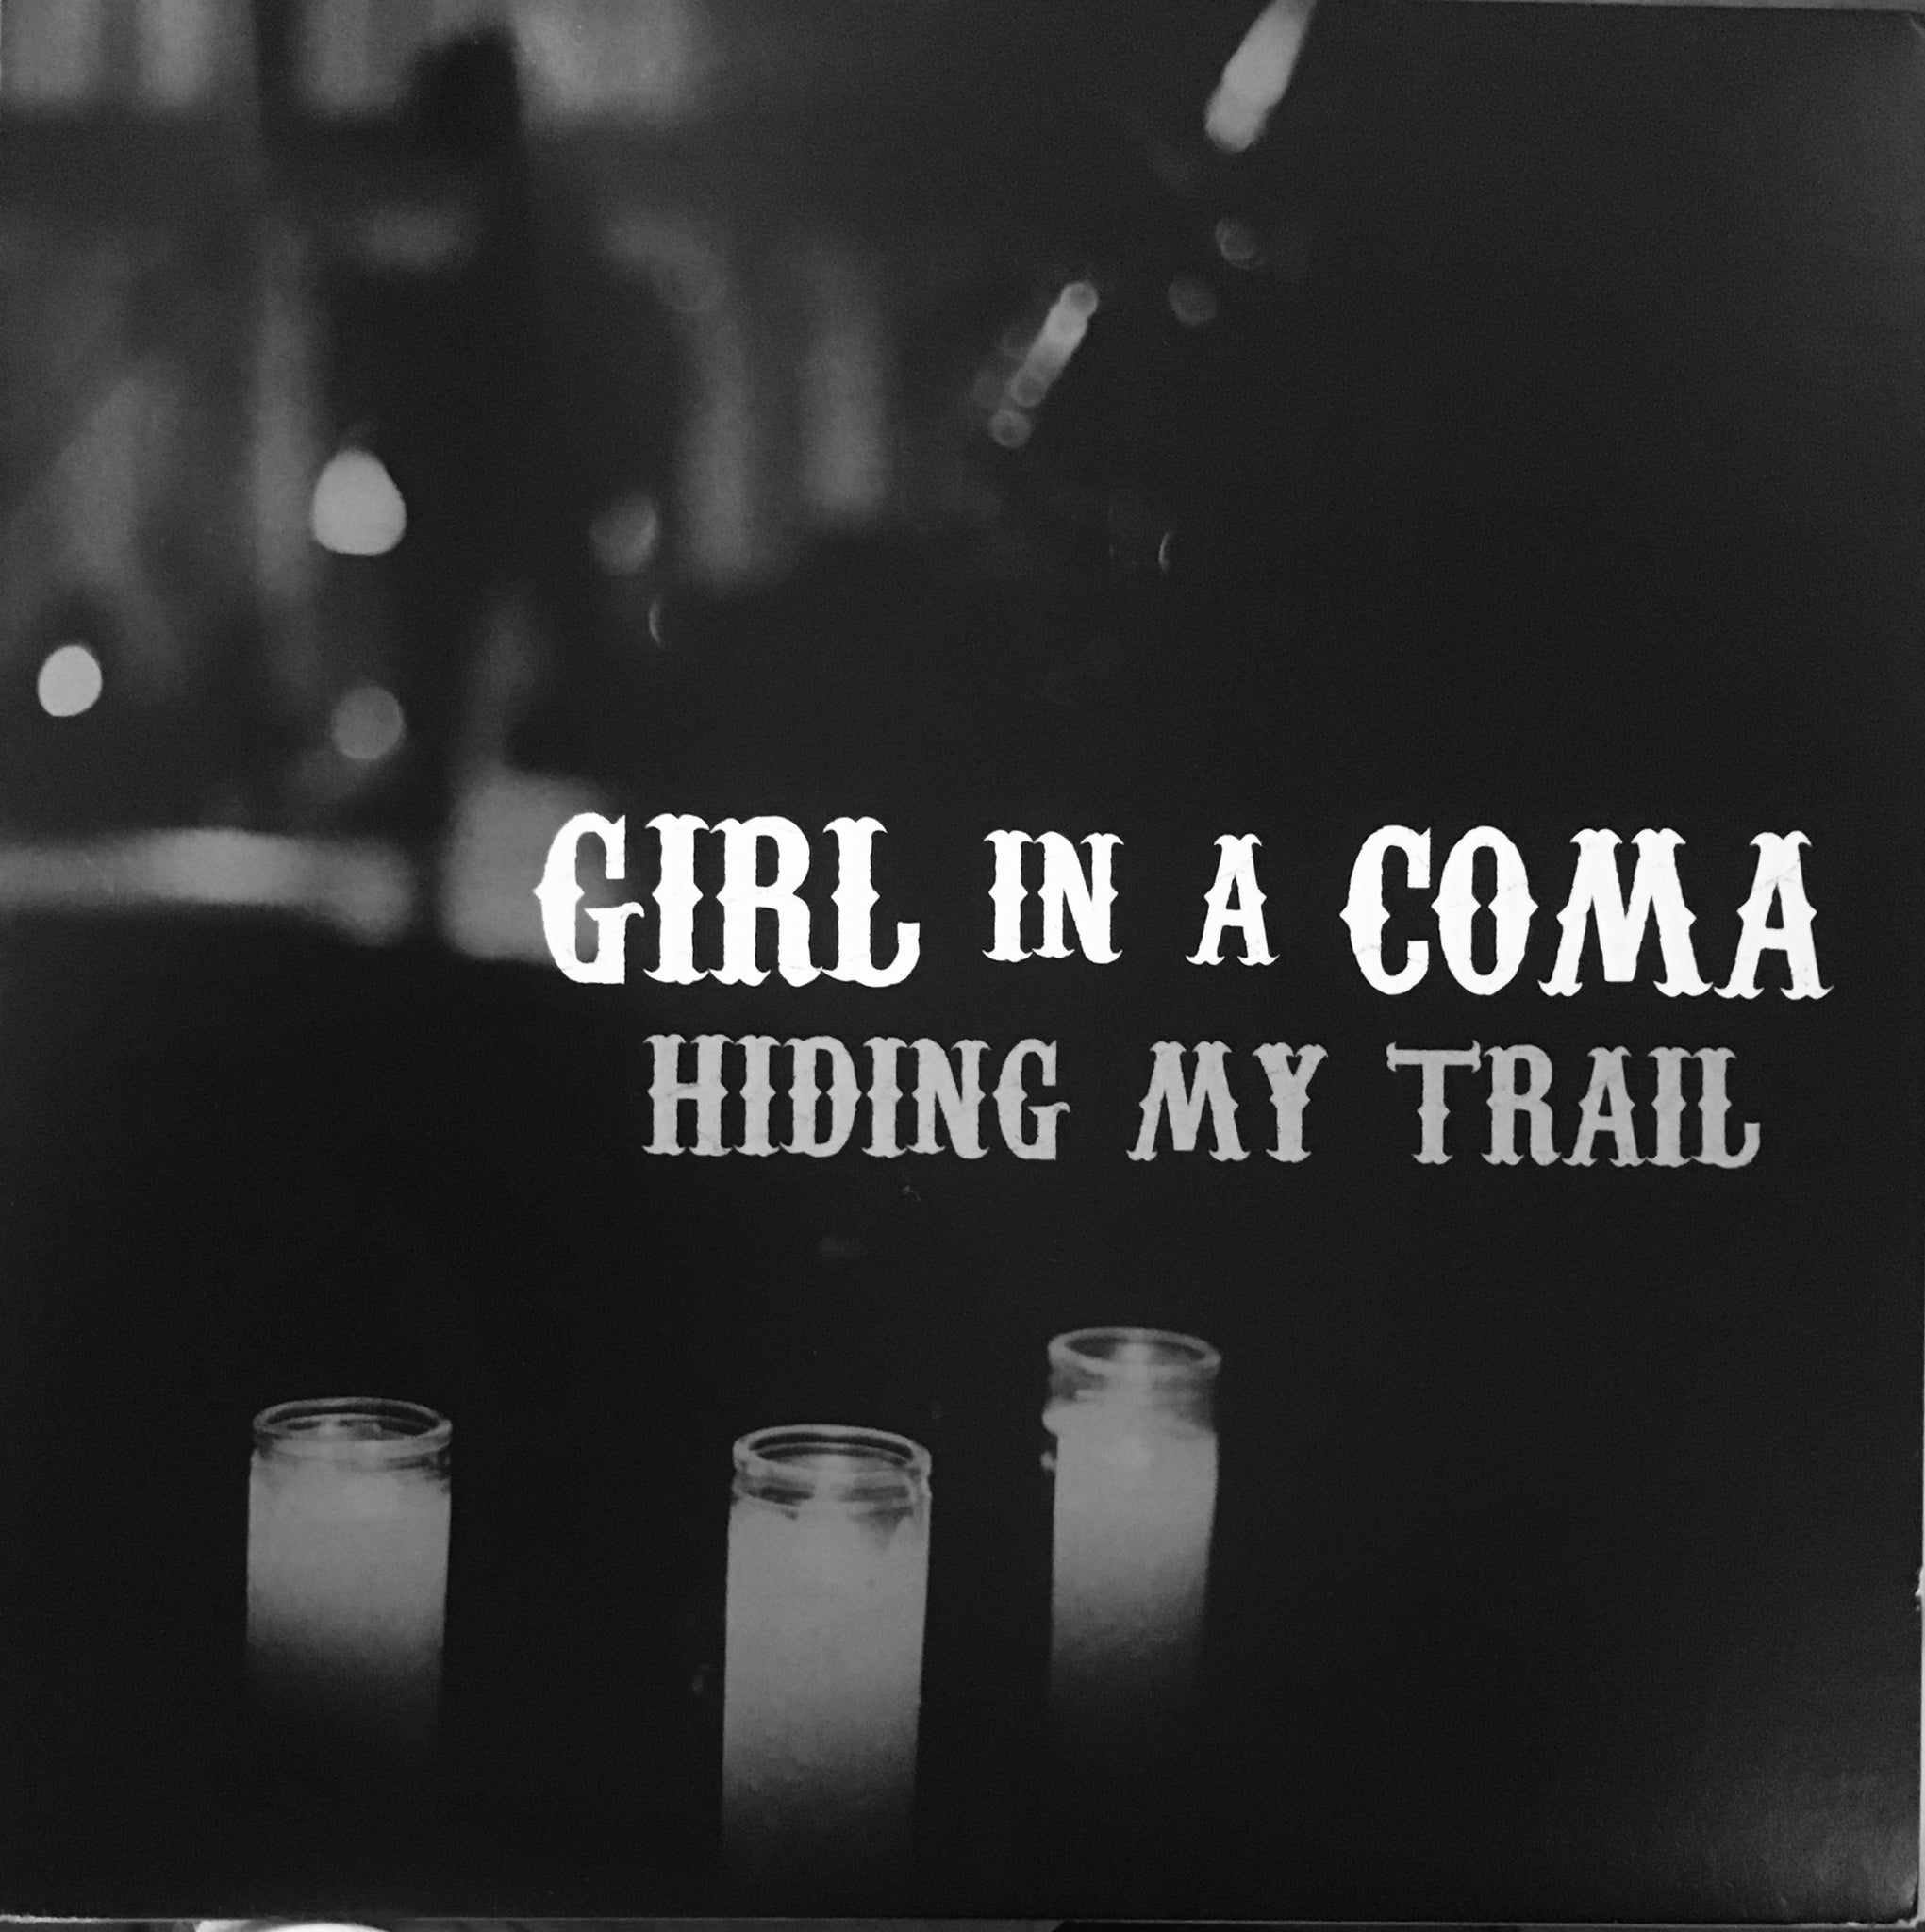 Girl In A Coma “Hiding My Trail EP” Single (2009)